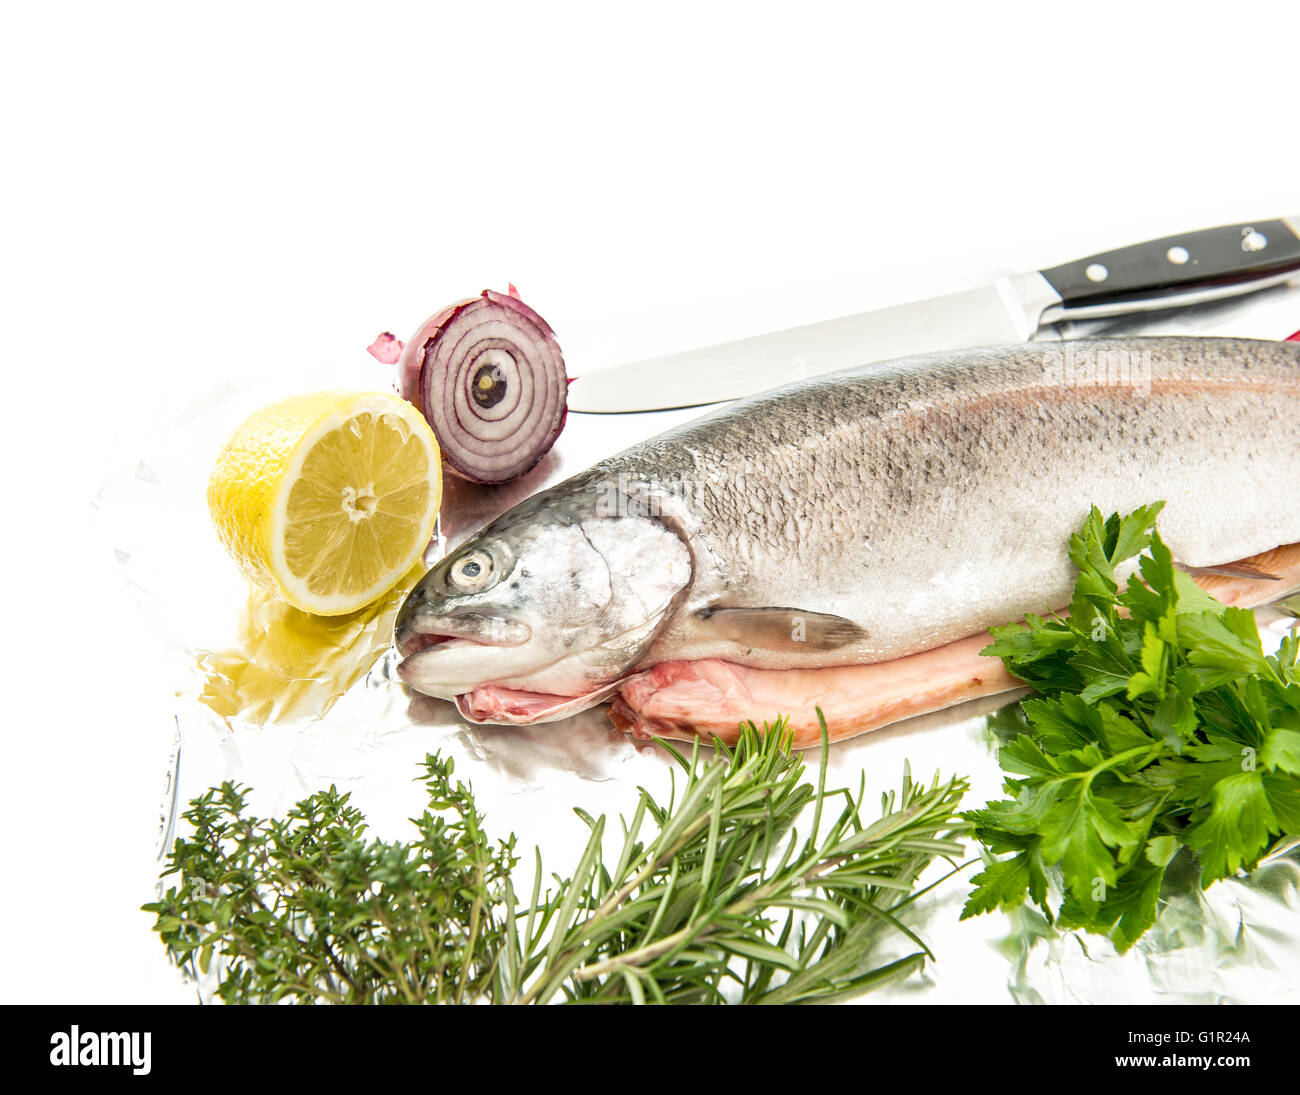 Salmon trout fish with fresh spices and herbs on white background. Healthy sea food Stock Photo